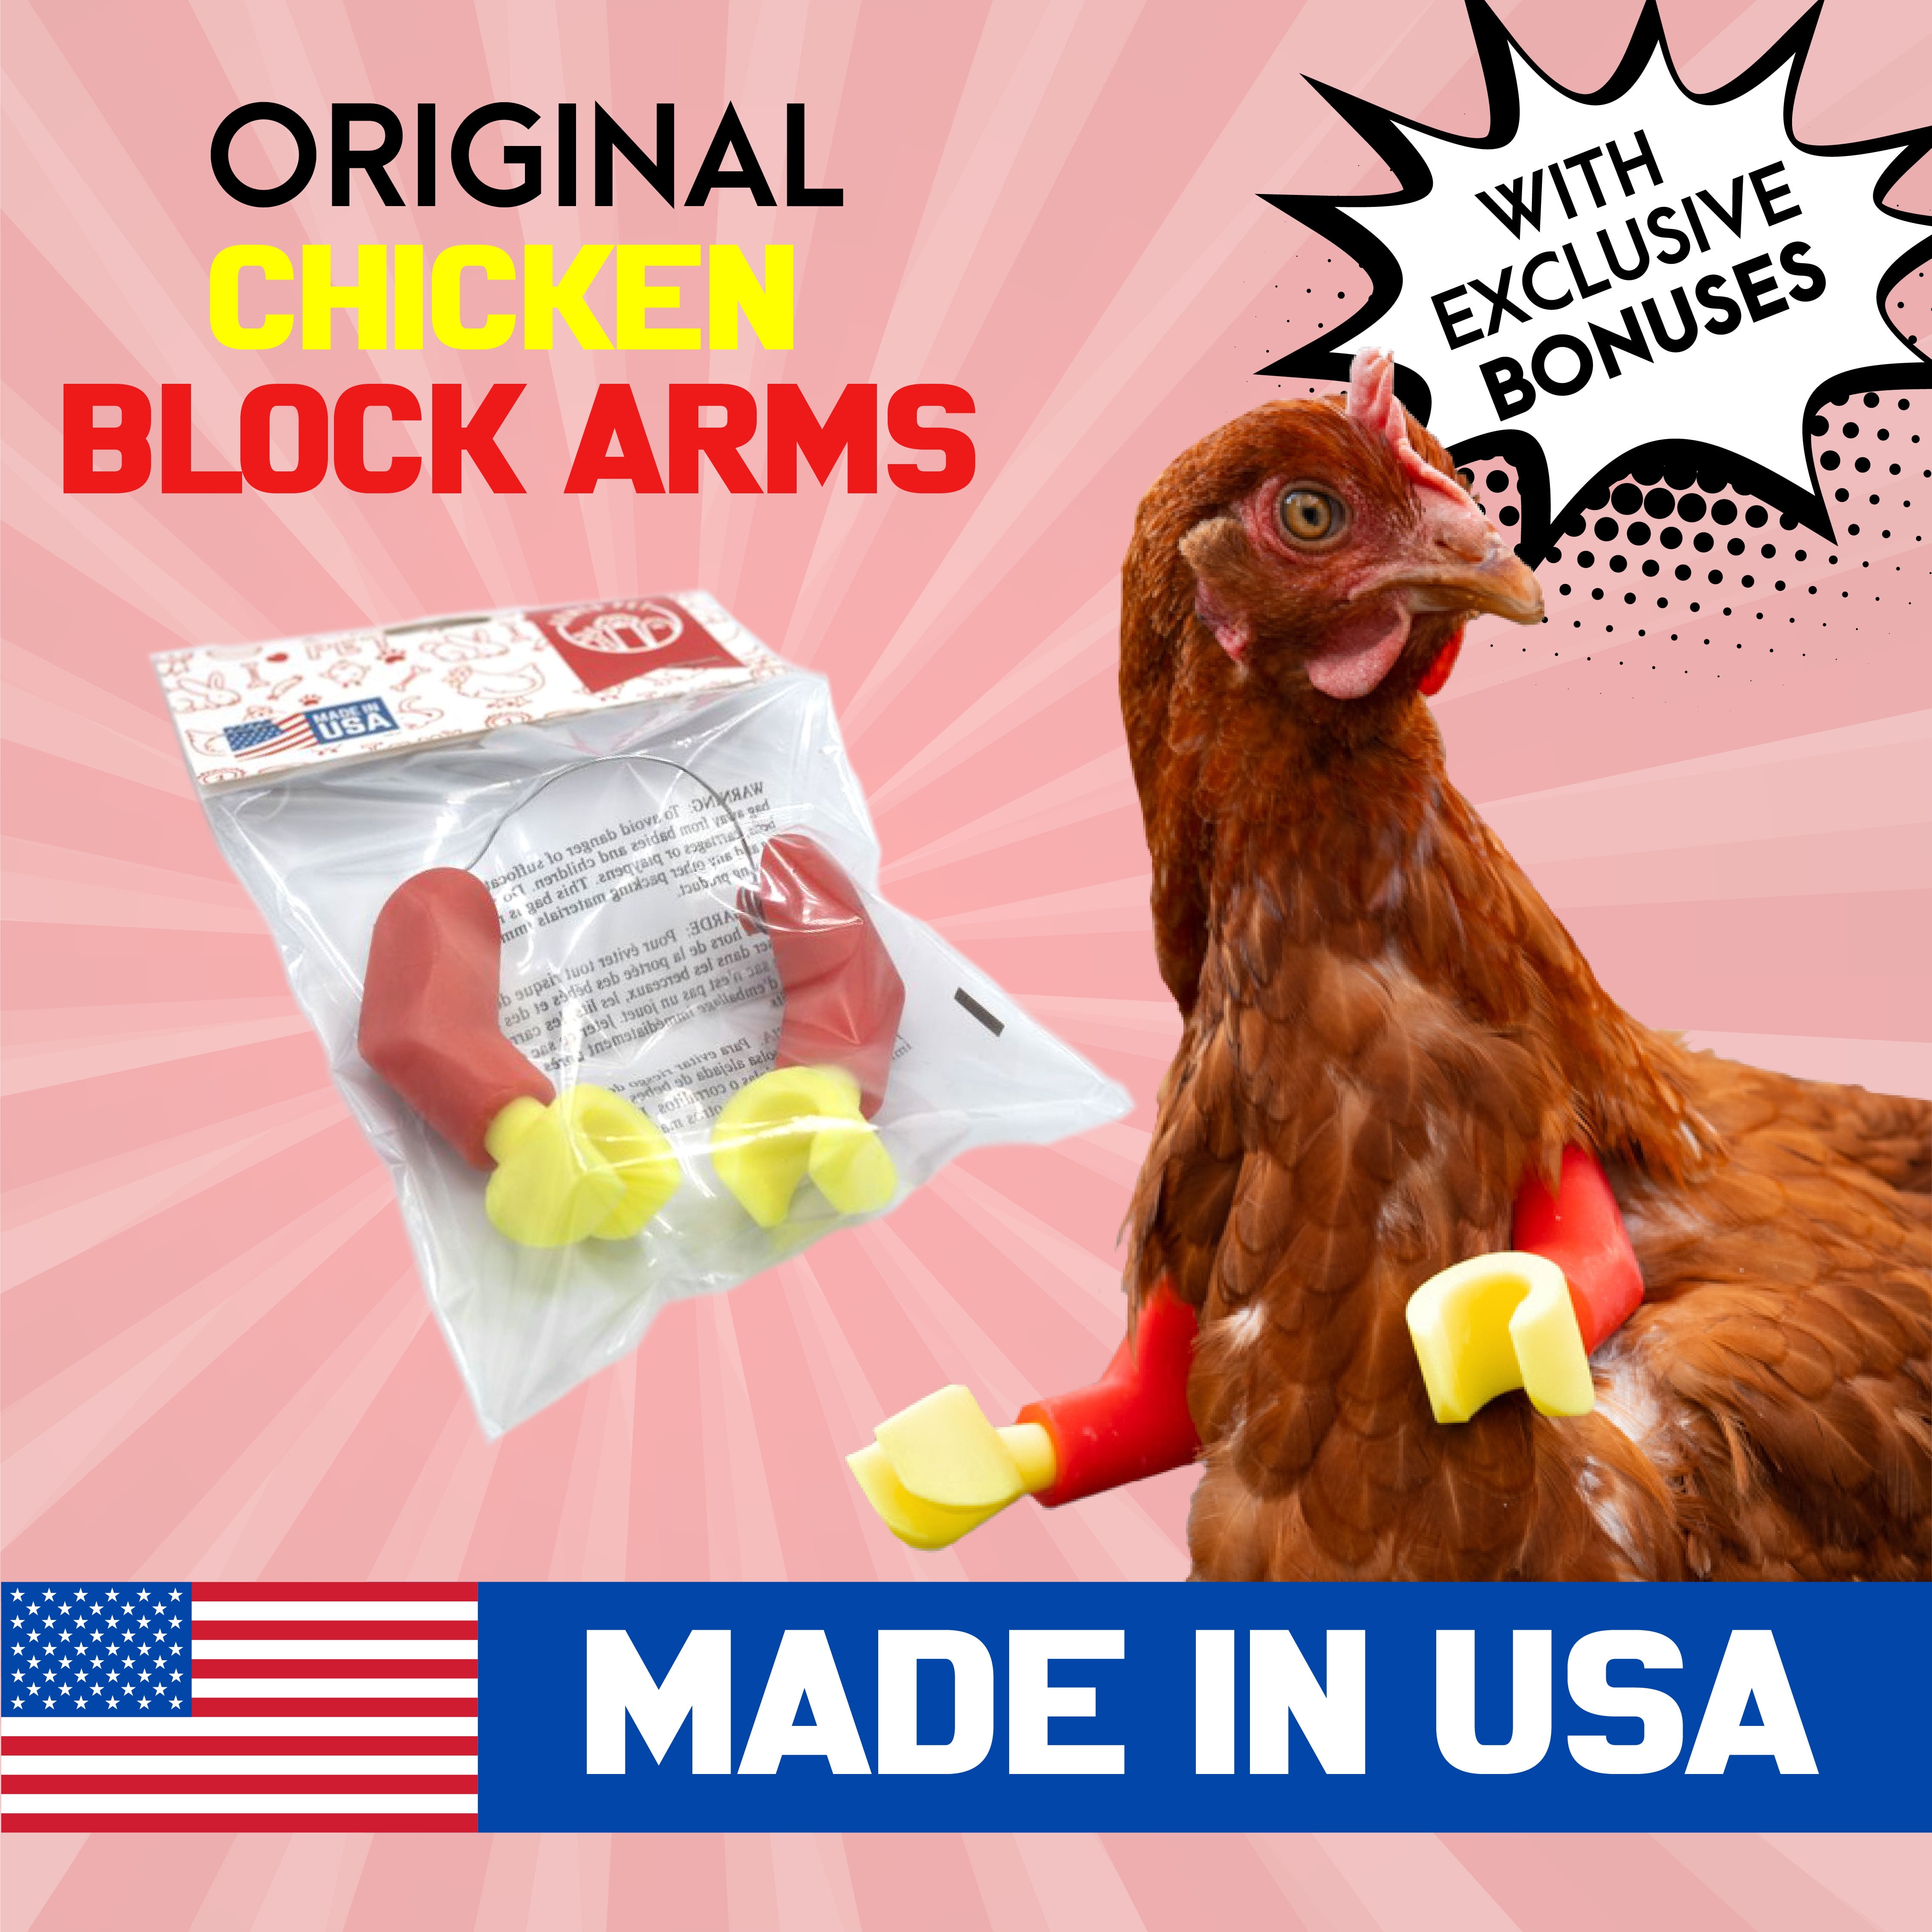 Made in America Original Chicken Fist Arms Gag Gift Arms for chicken to  wear